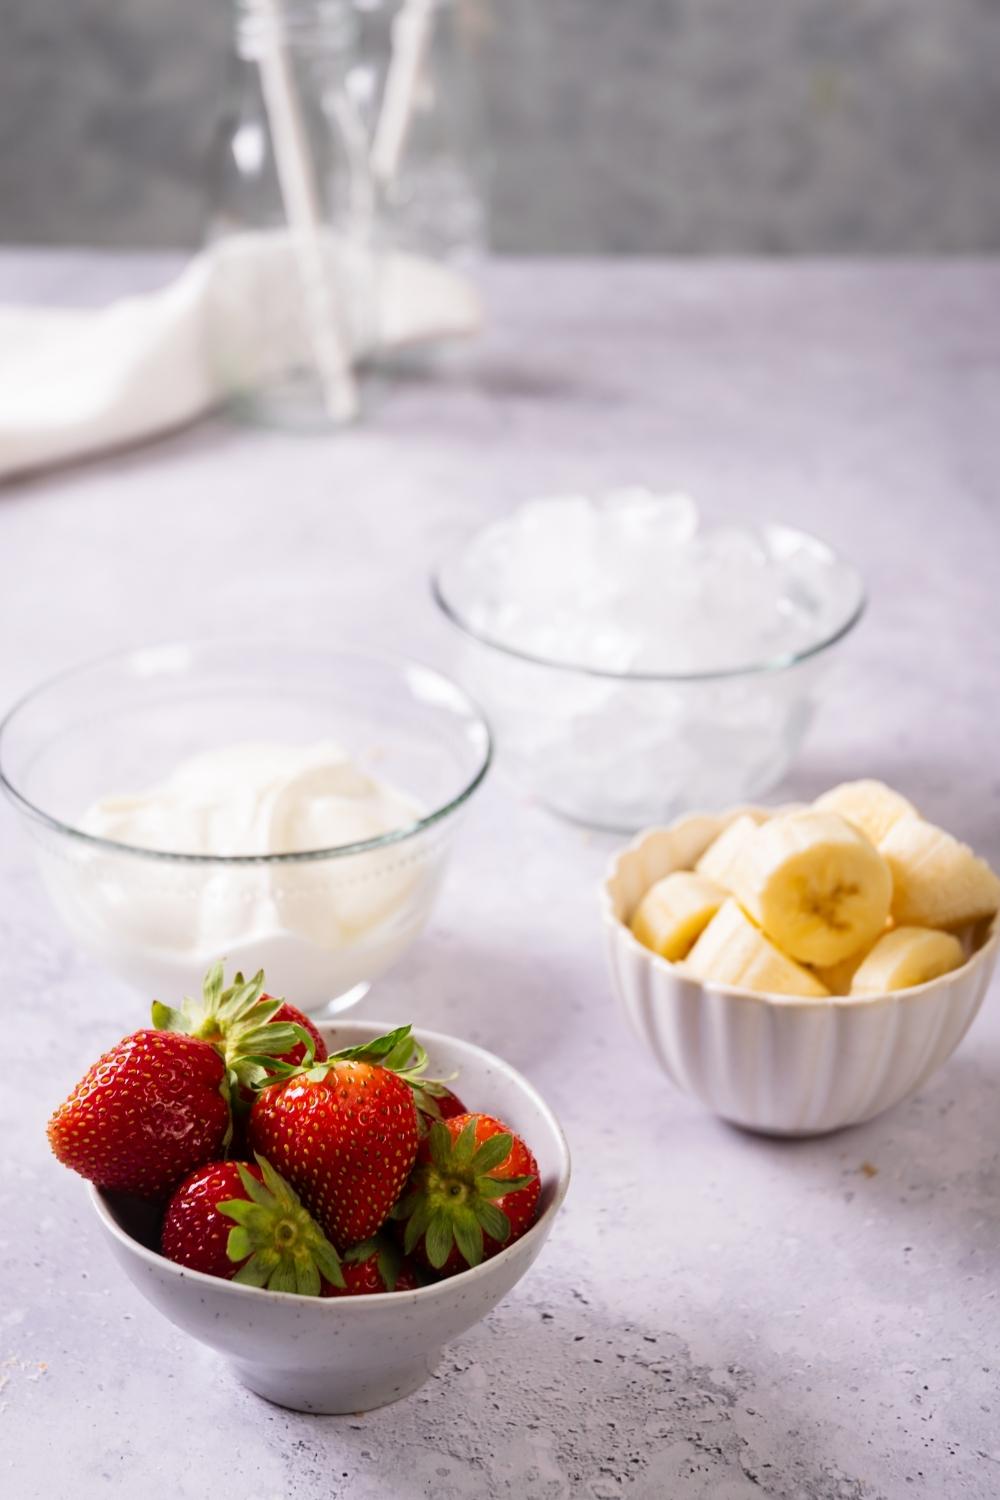 A bowl of strawberries, a bowl of sliced bananas, a bowl of yogurt, and a bowl of ice on a counter.